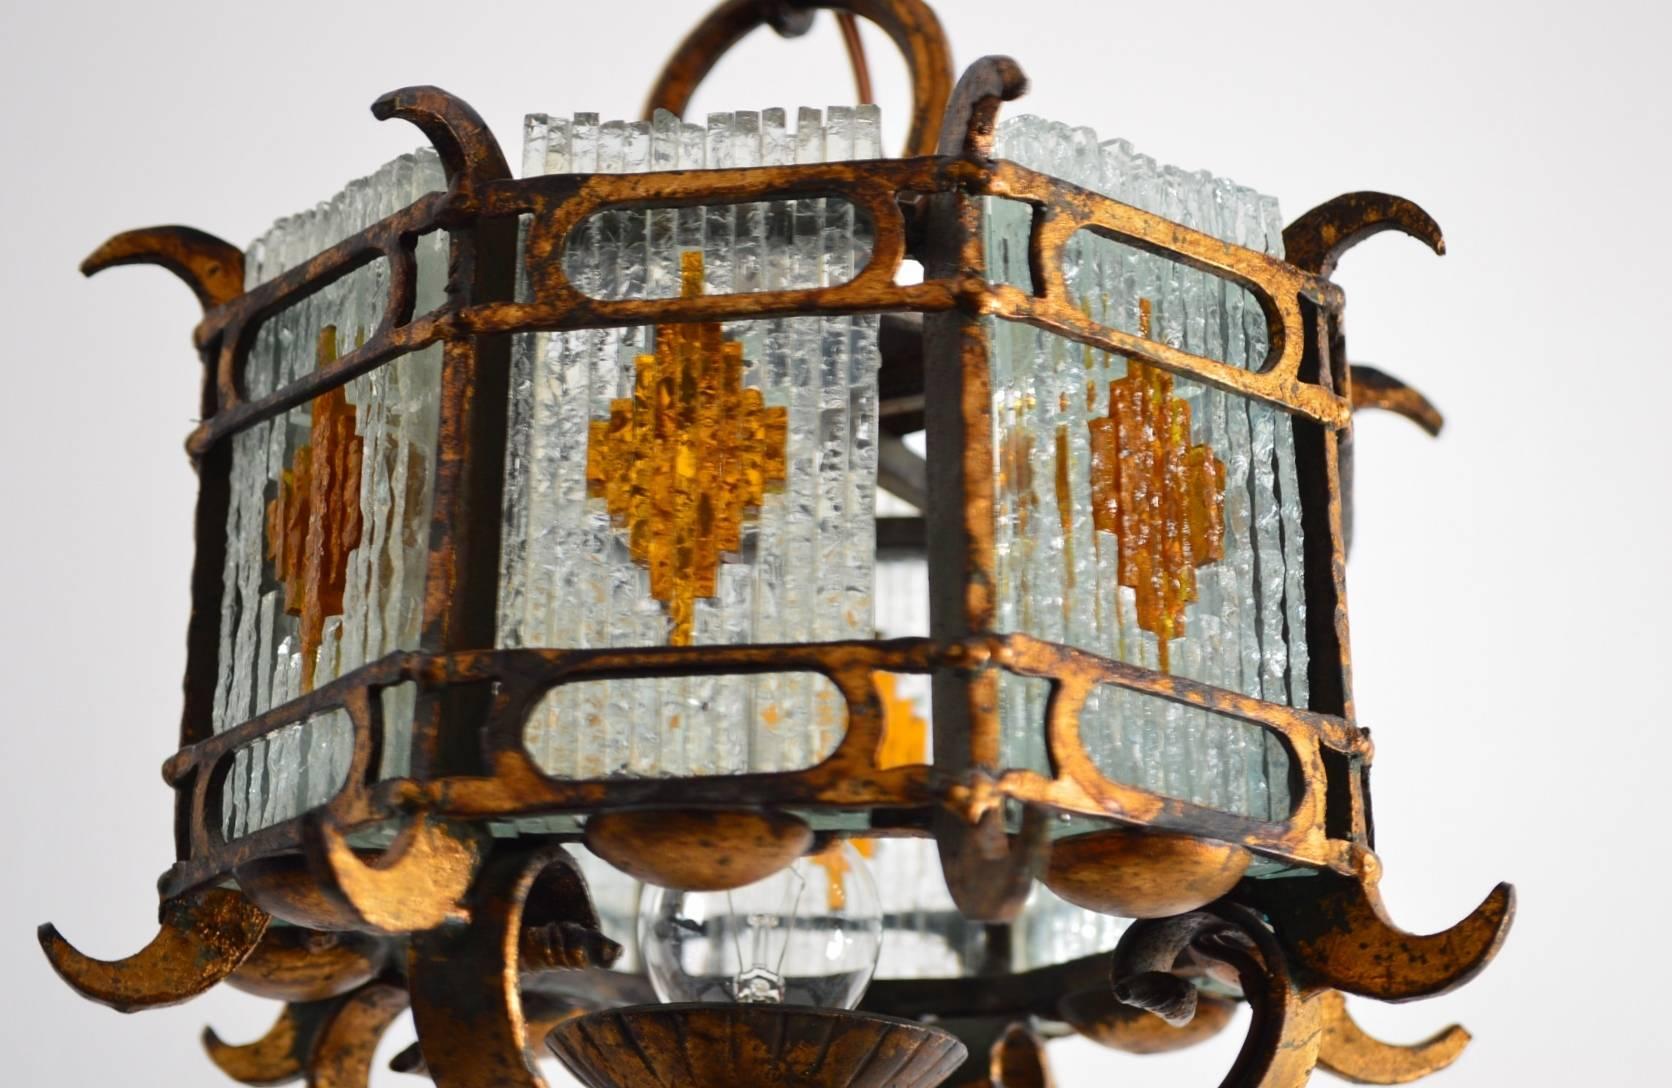 Mid-20th Century Cut-Glass and Gilt Wrought Iron Lantern Pendant Lamp Brutalist Style, Italy